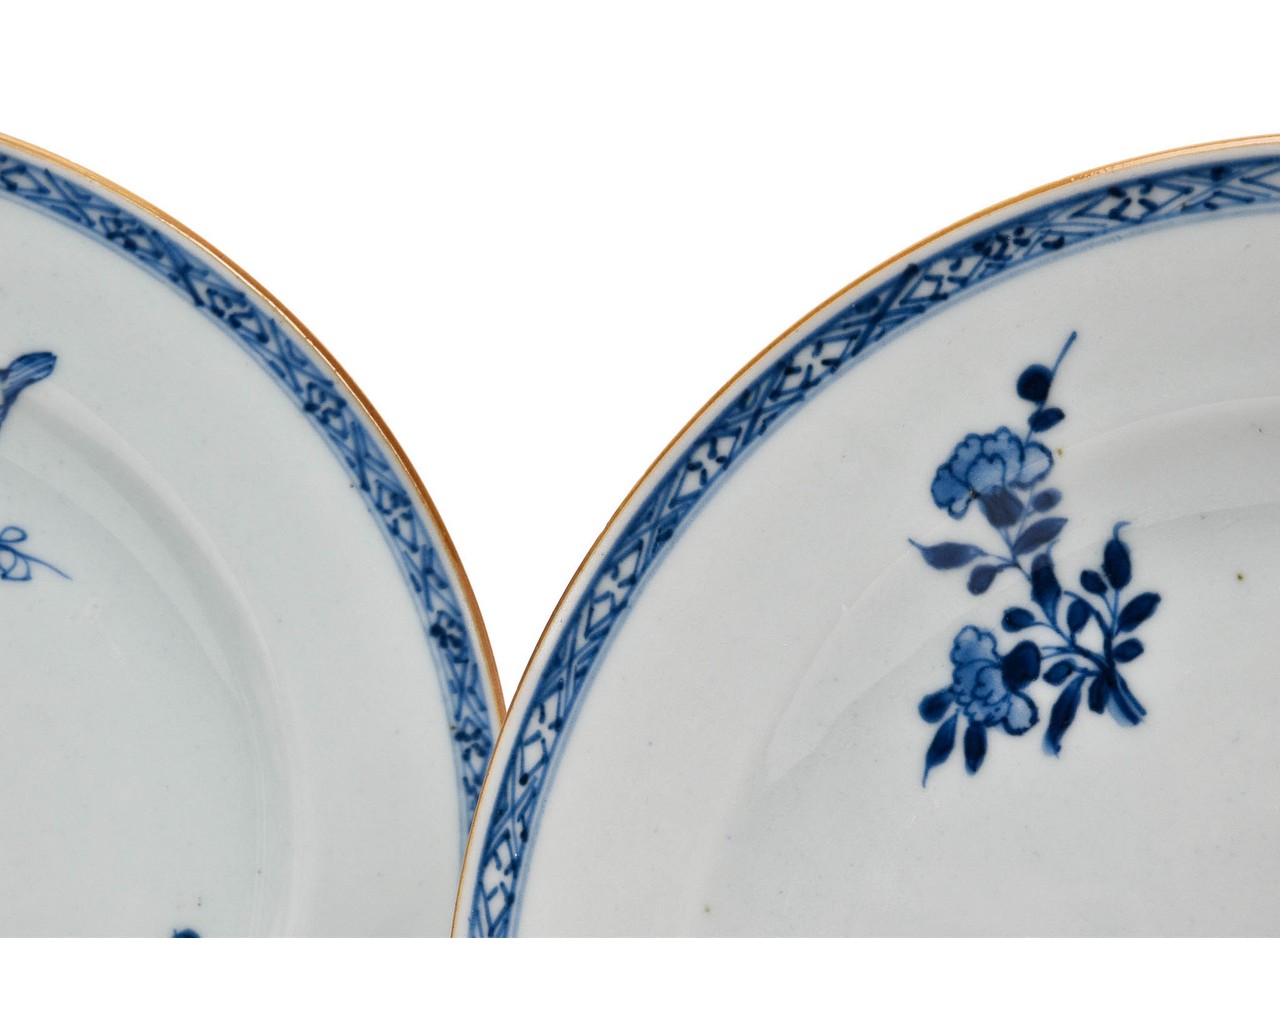 FIVE CHINESE BLUE AND WHITE PORCELAIN PLATES - Image 5 of 6